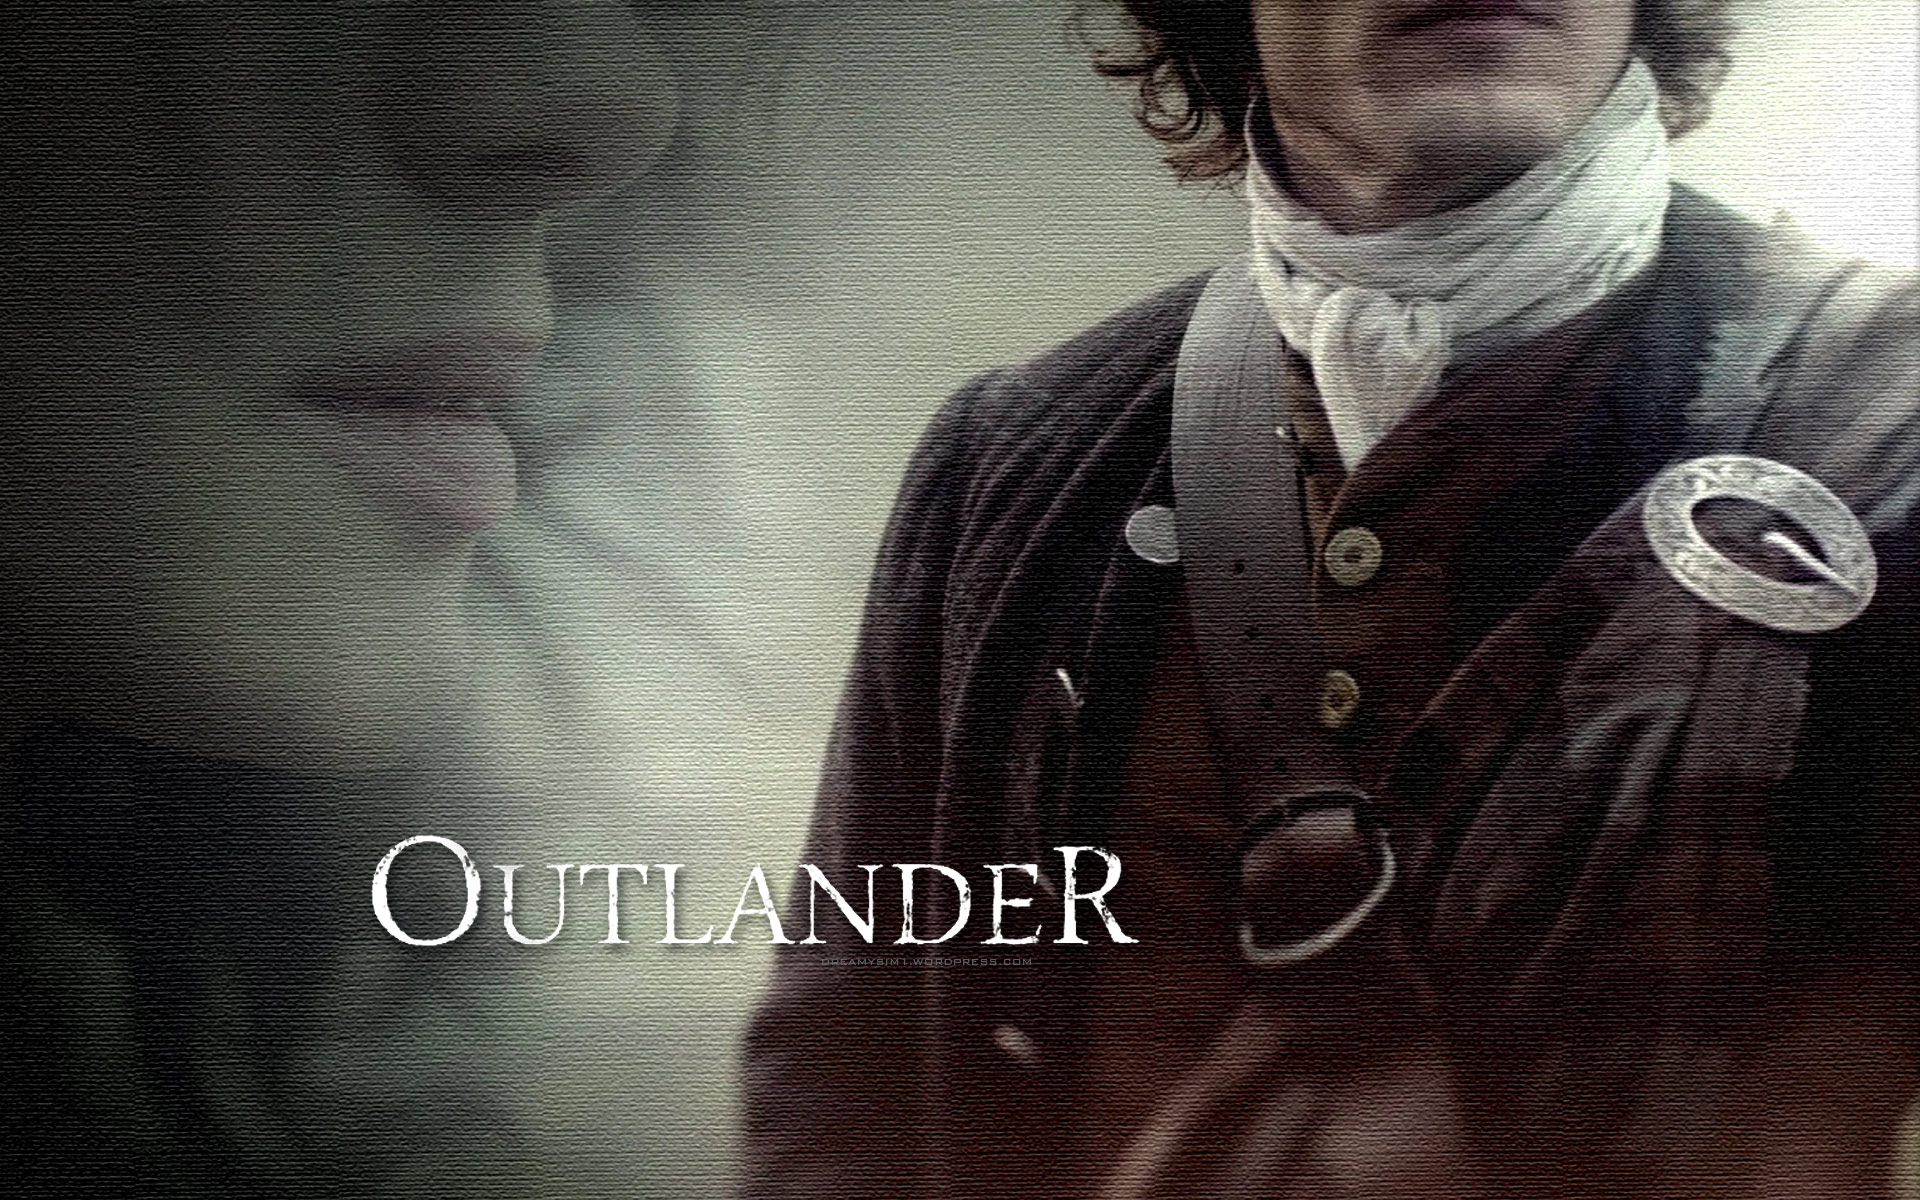 5 Gorgeous Outlander Wallpapers Made By Dreamysim1 HD Wallpapers Download Free Map Images Wallpaper [wallpaper684.blogspot.com]